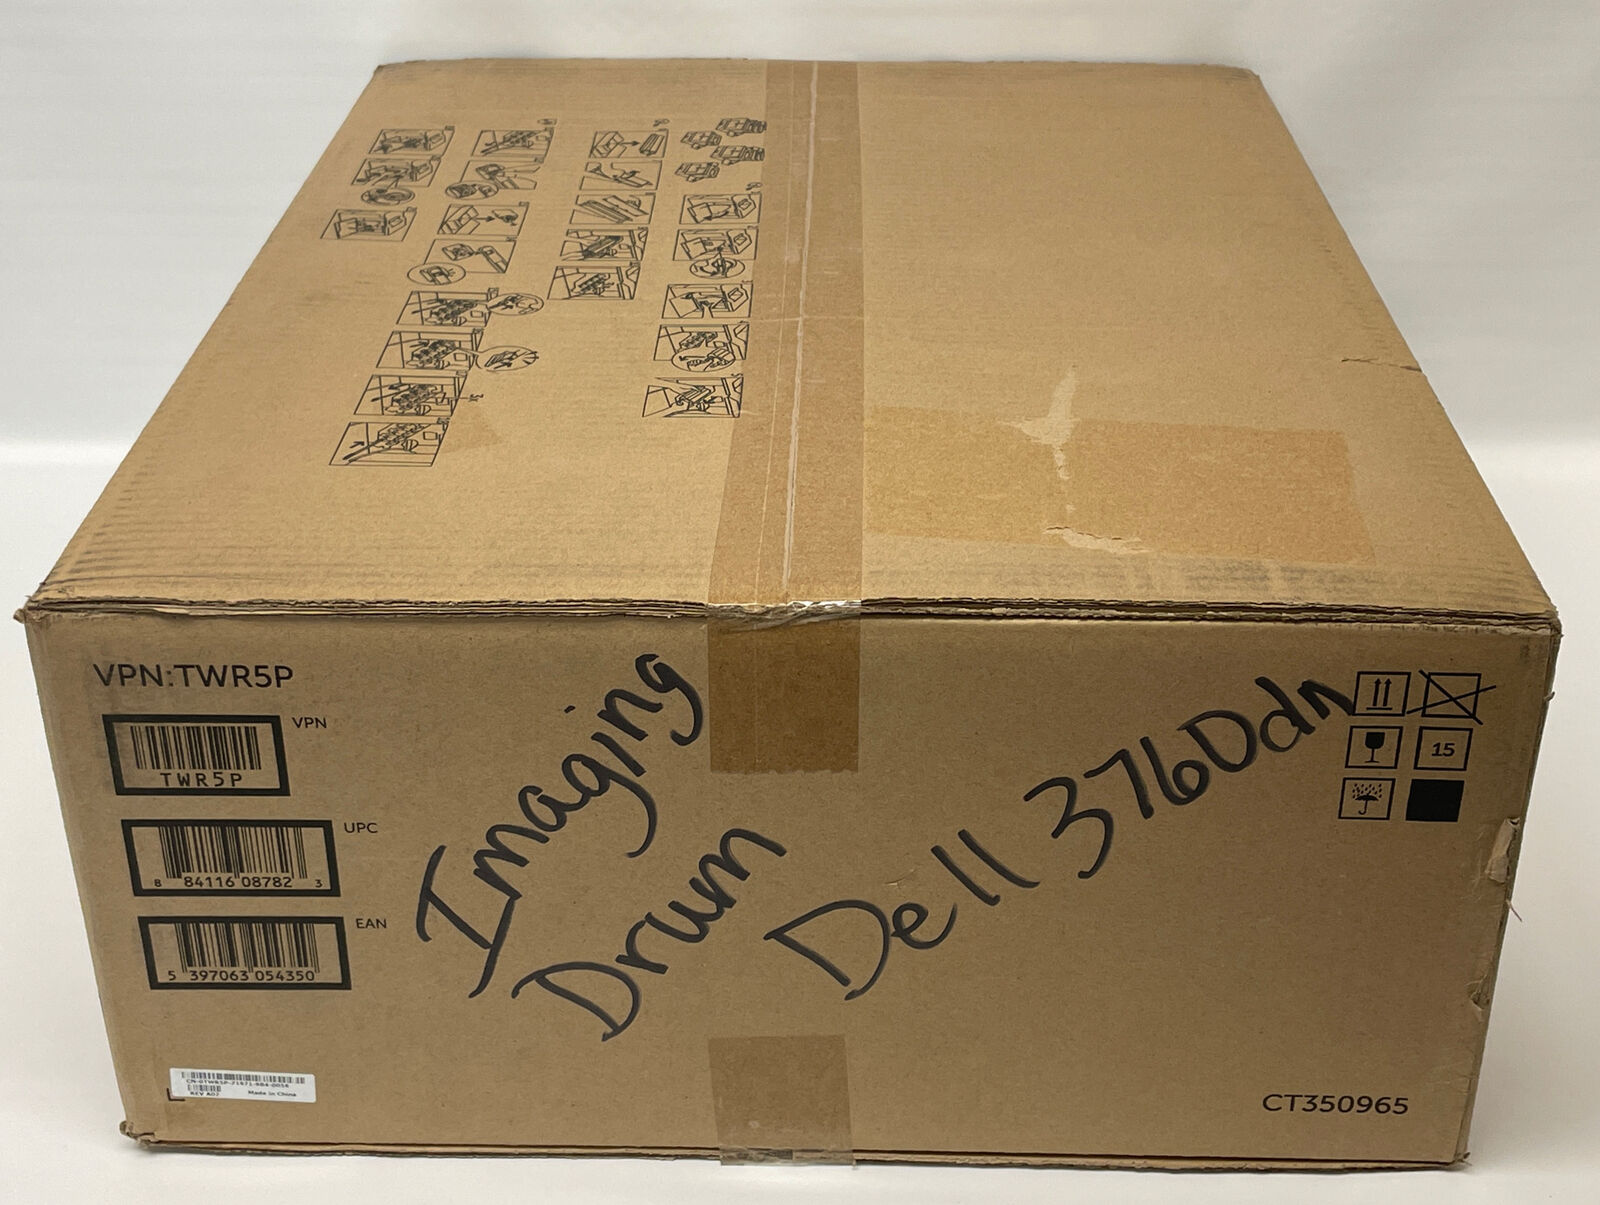 New Genuine Dell TWR5P Imaging Drum for C266x/C376x/S384x Series-Factory Sealed